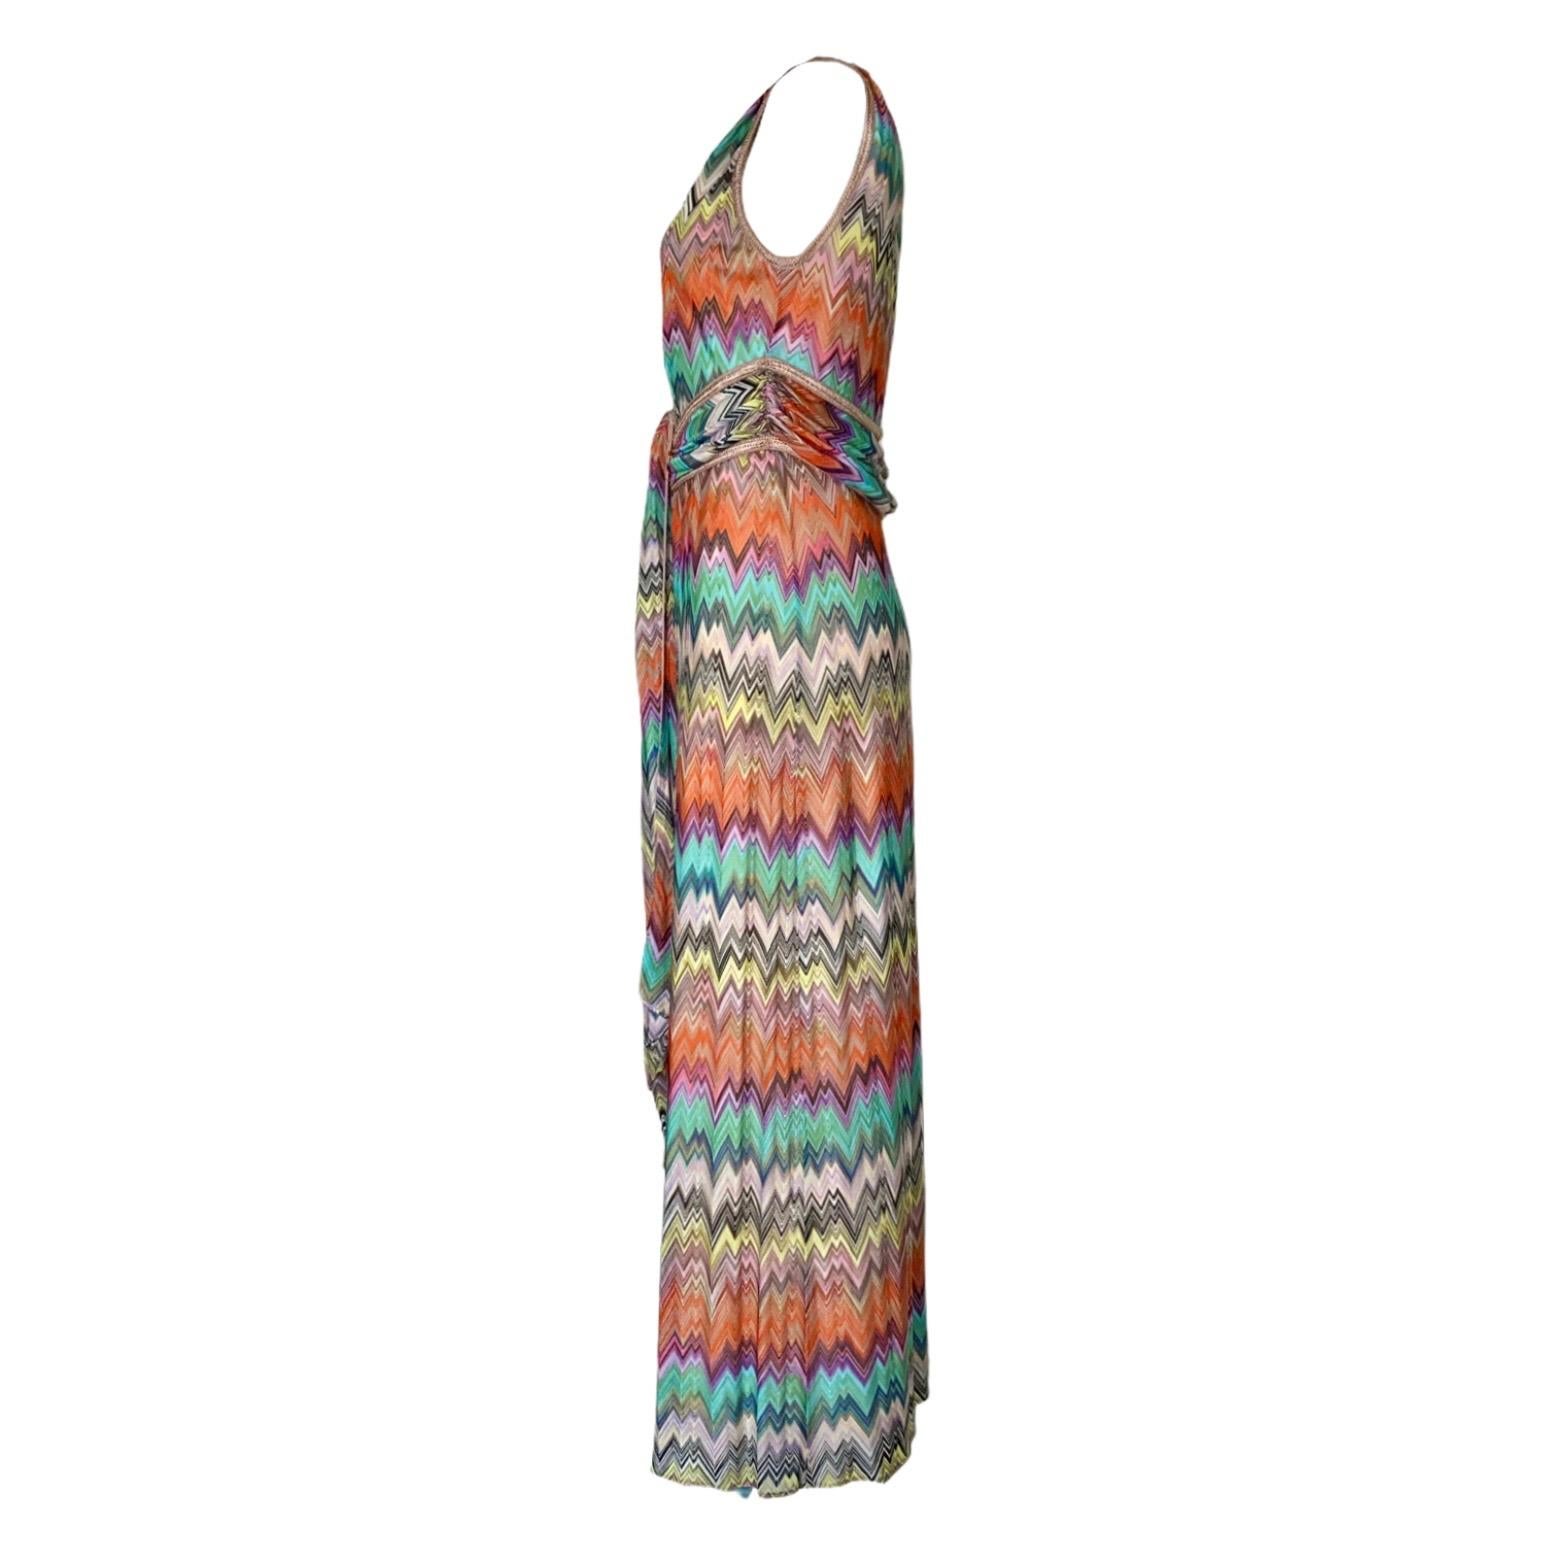 Stunning MISSONI sigature chevron zigzag crochet knit maxi dress
Wonderful rainbow colors
Belt style detail
Buttons in front
Fully lined
Contrast trim
Dry Clean only
Made in Italy
So versatile, can be worn with deep cleavage (buttons open) semi-deep